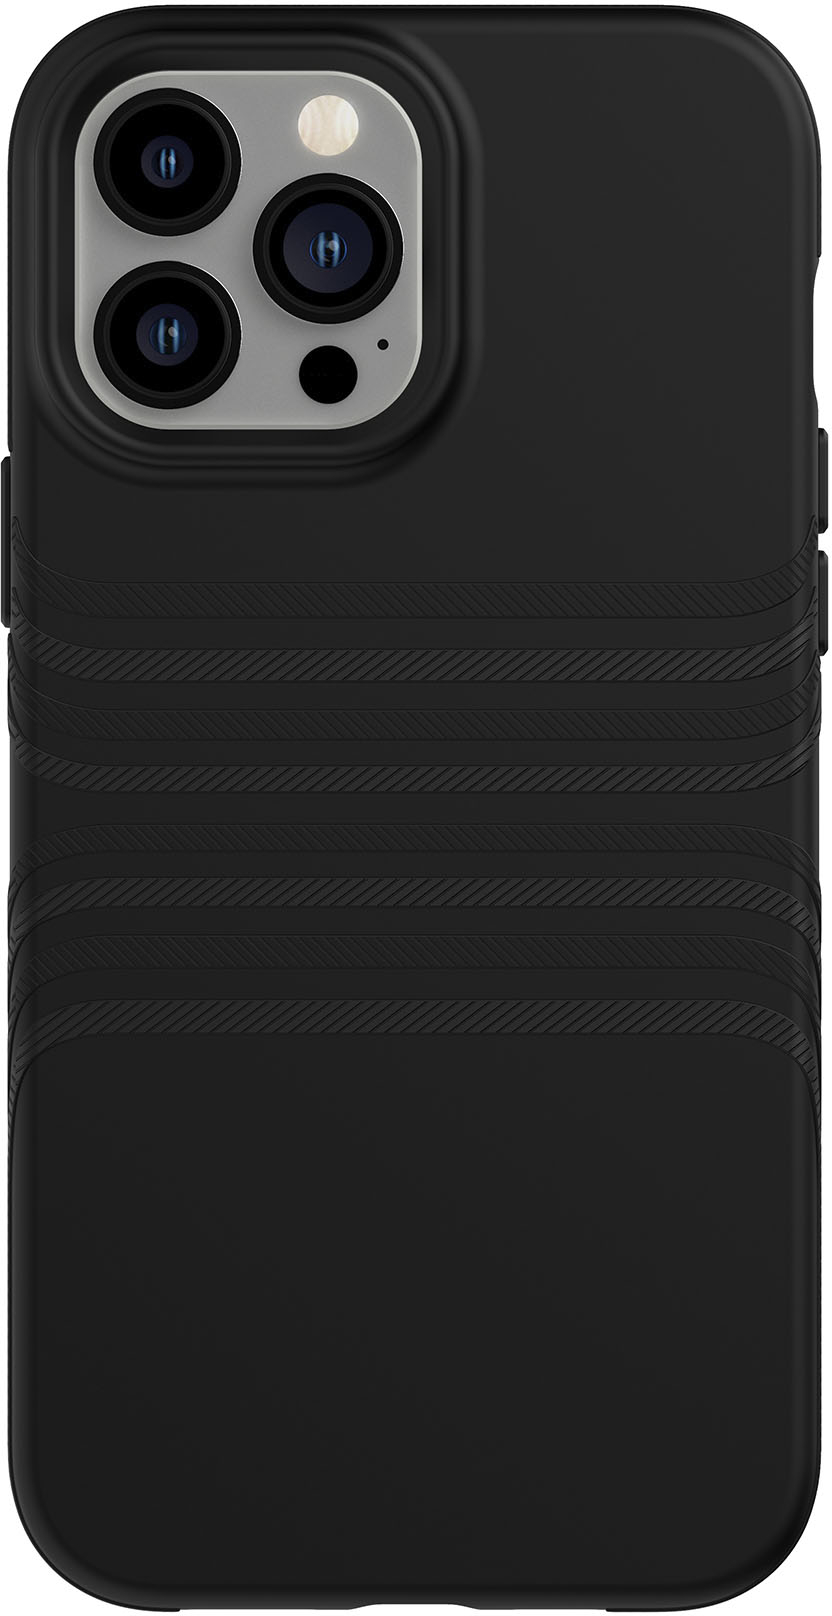 Tech21 - EvoTactile Hard Shell Case for Apple iPhone 13 Pro Max & iPhone 12 Pro Max - Black